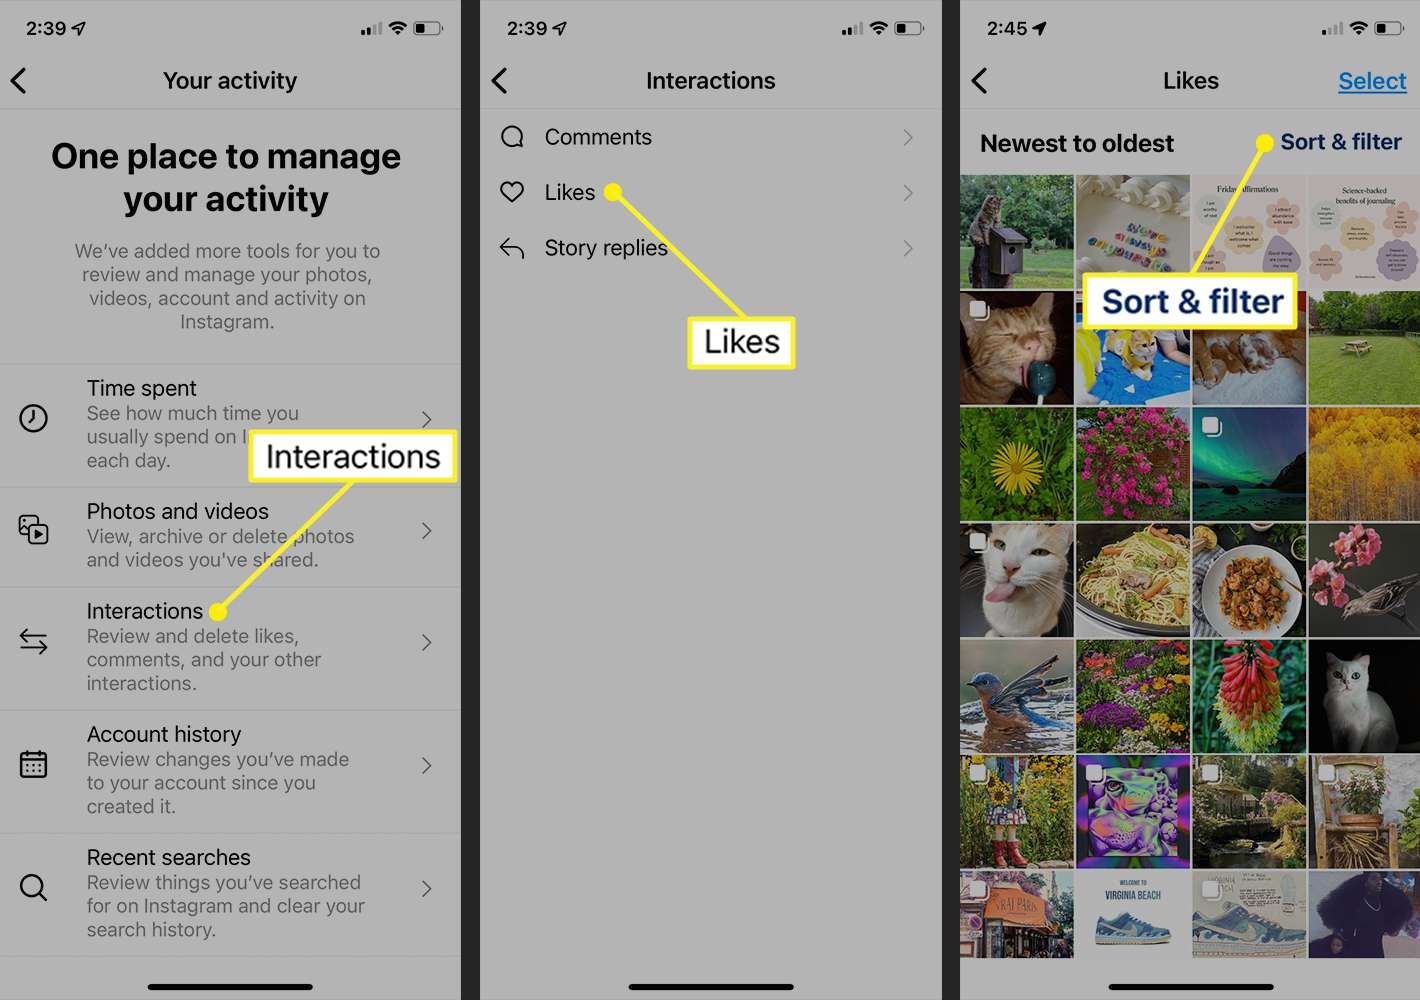 A step-by-step guide to viewing liked posts on Instagram. To view your liked posts, tap on the profile icon in the bottom right corner of the screen, then tap on the three lines in the top right corner and select 'Settings'. From there, tap on 'Account' and then 'Posts you've liked'.